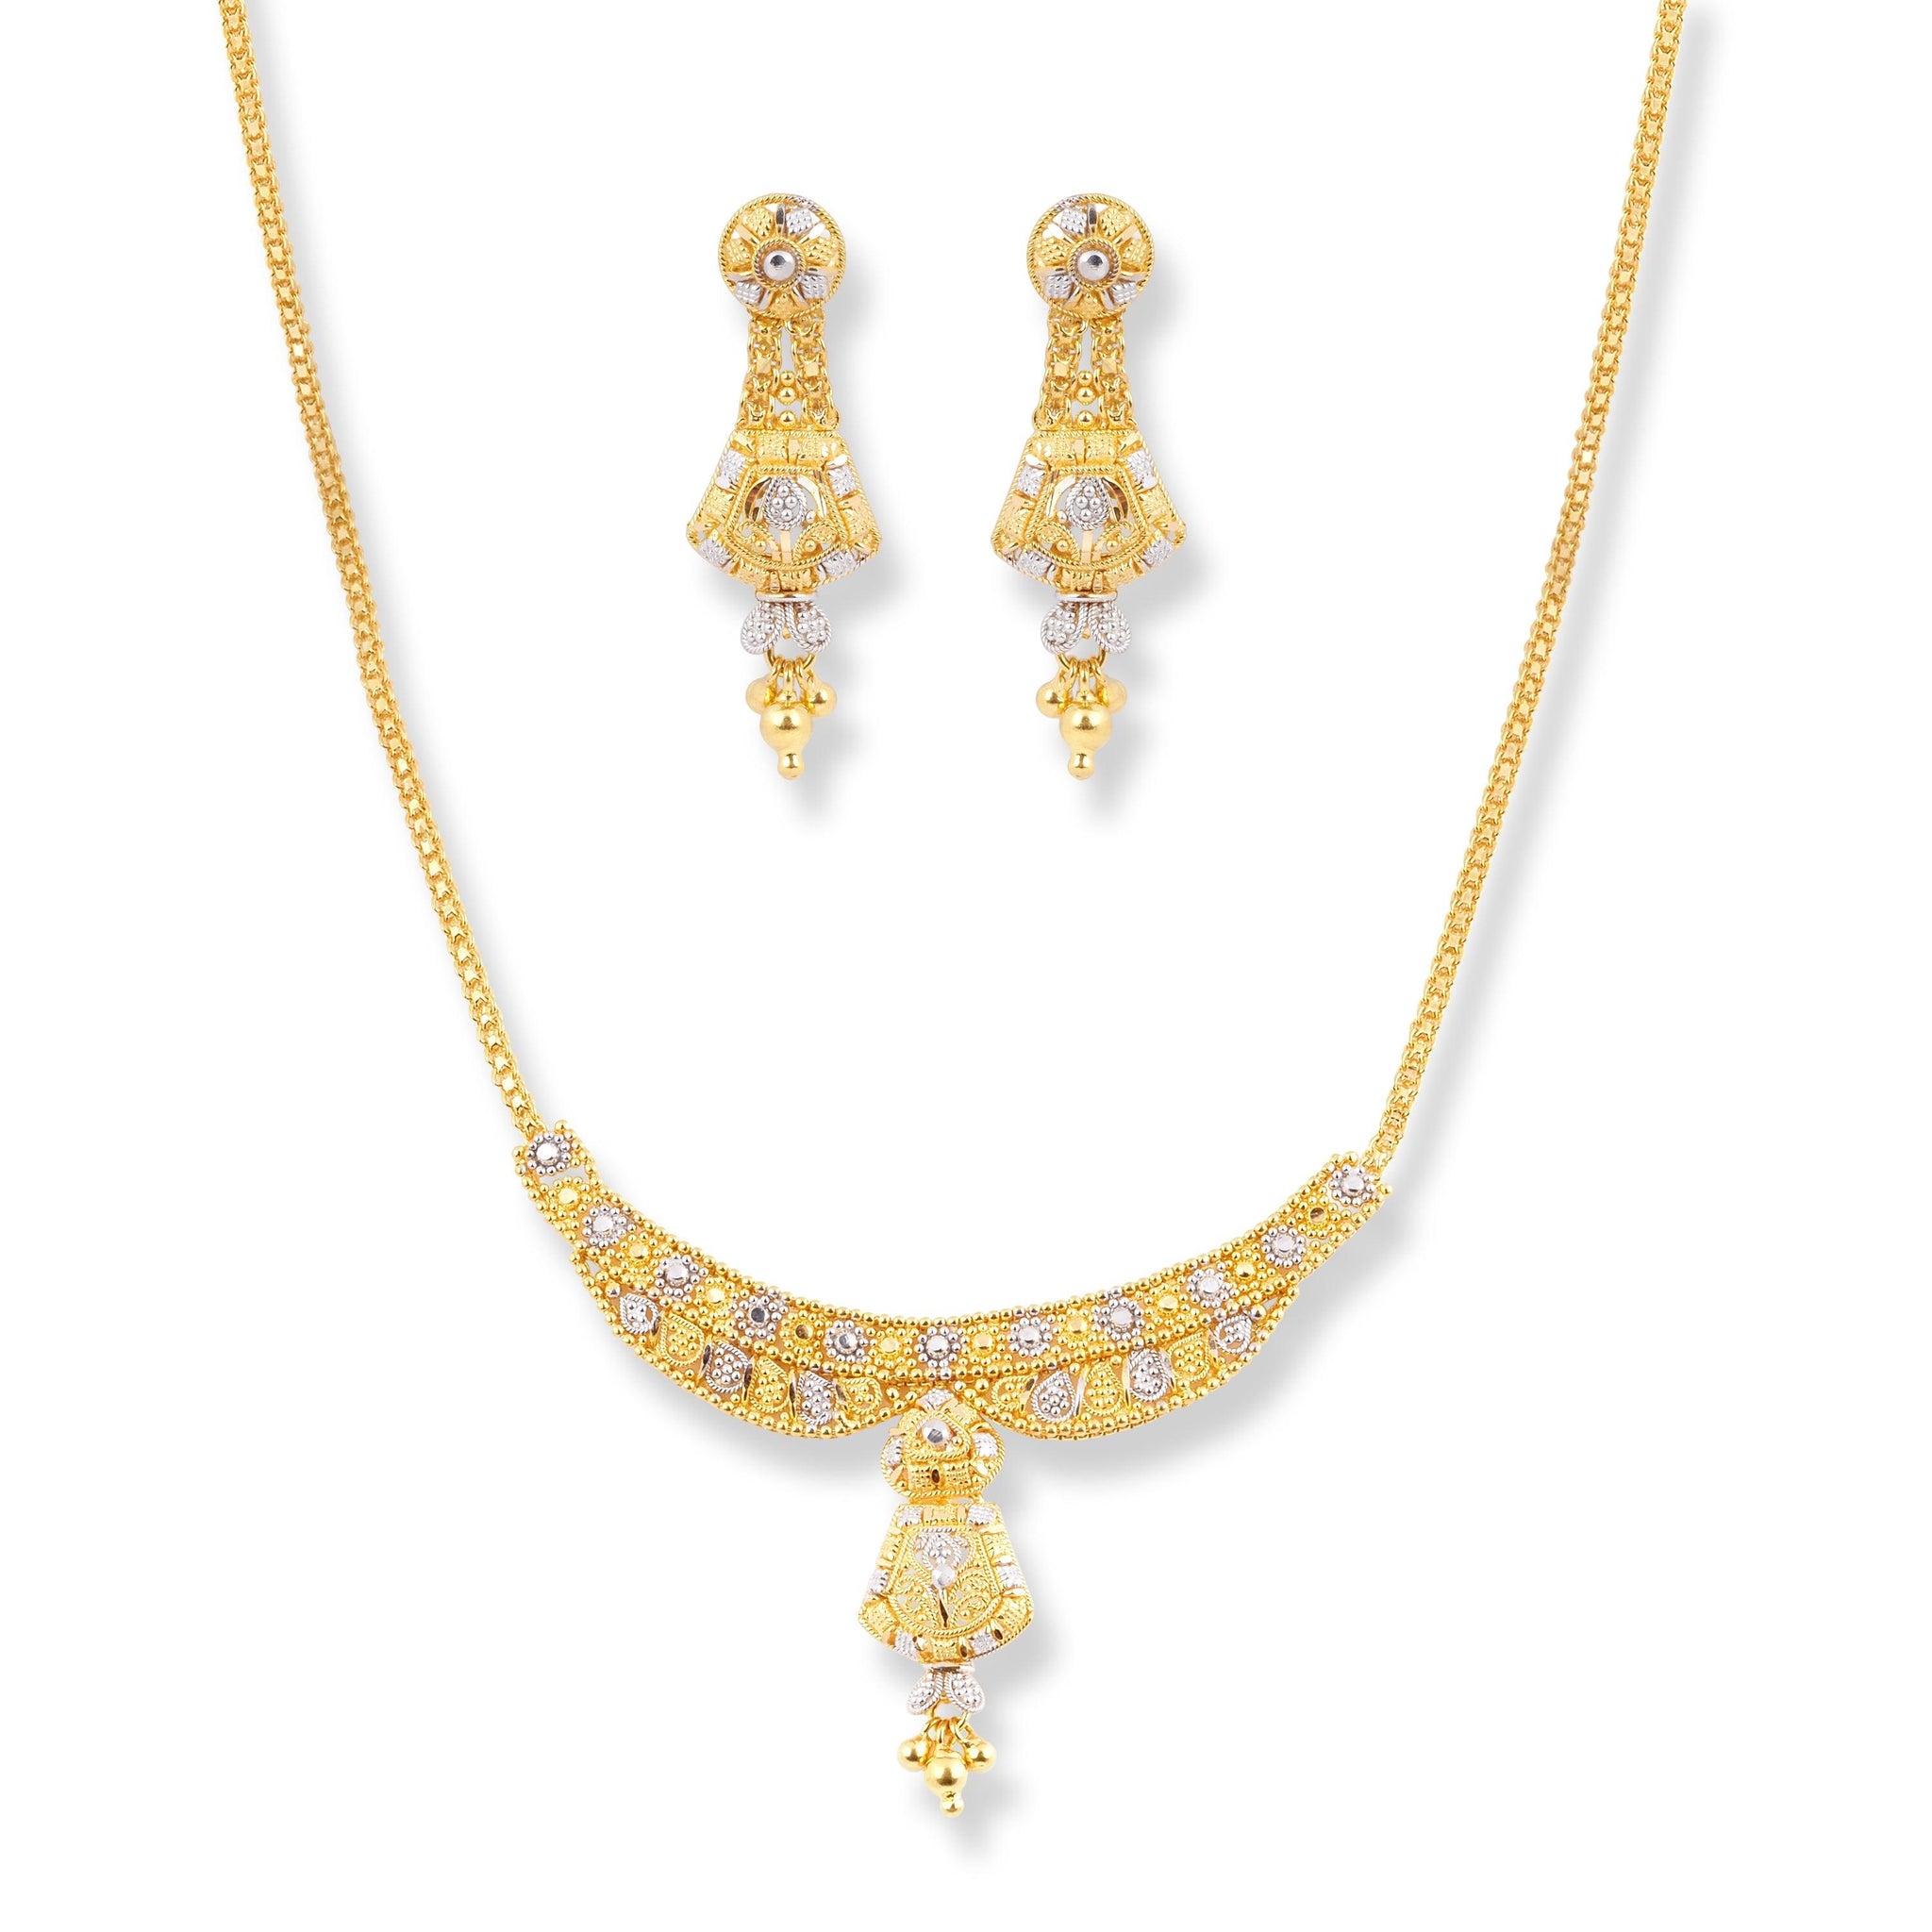 22ct Yellow Gold Necklace & Earring Set With Rhodium Plating Design